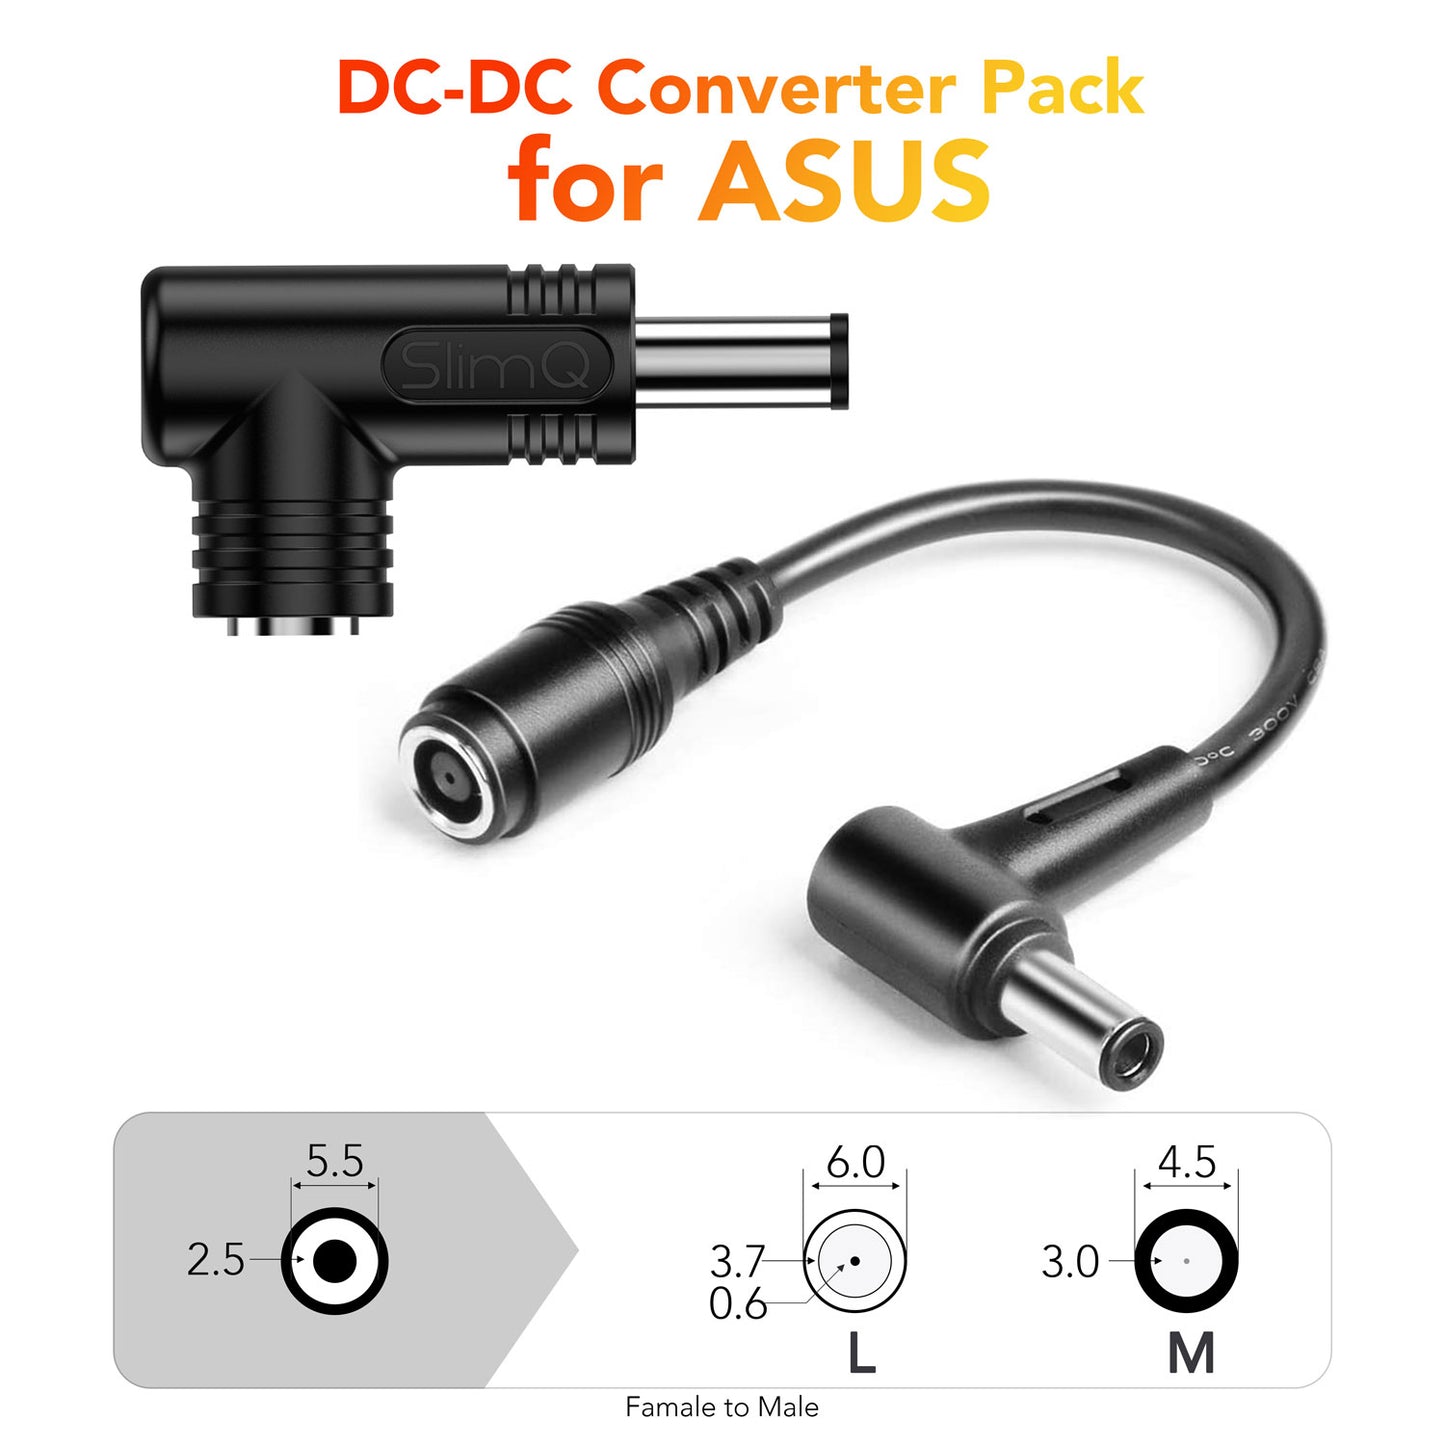 DC to DC Converter Pack for ASUS